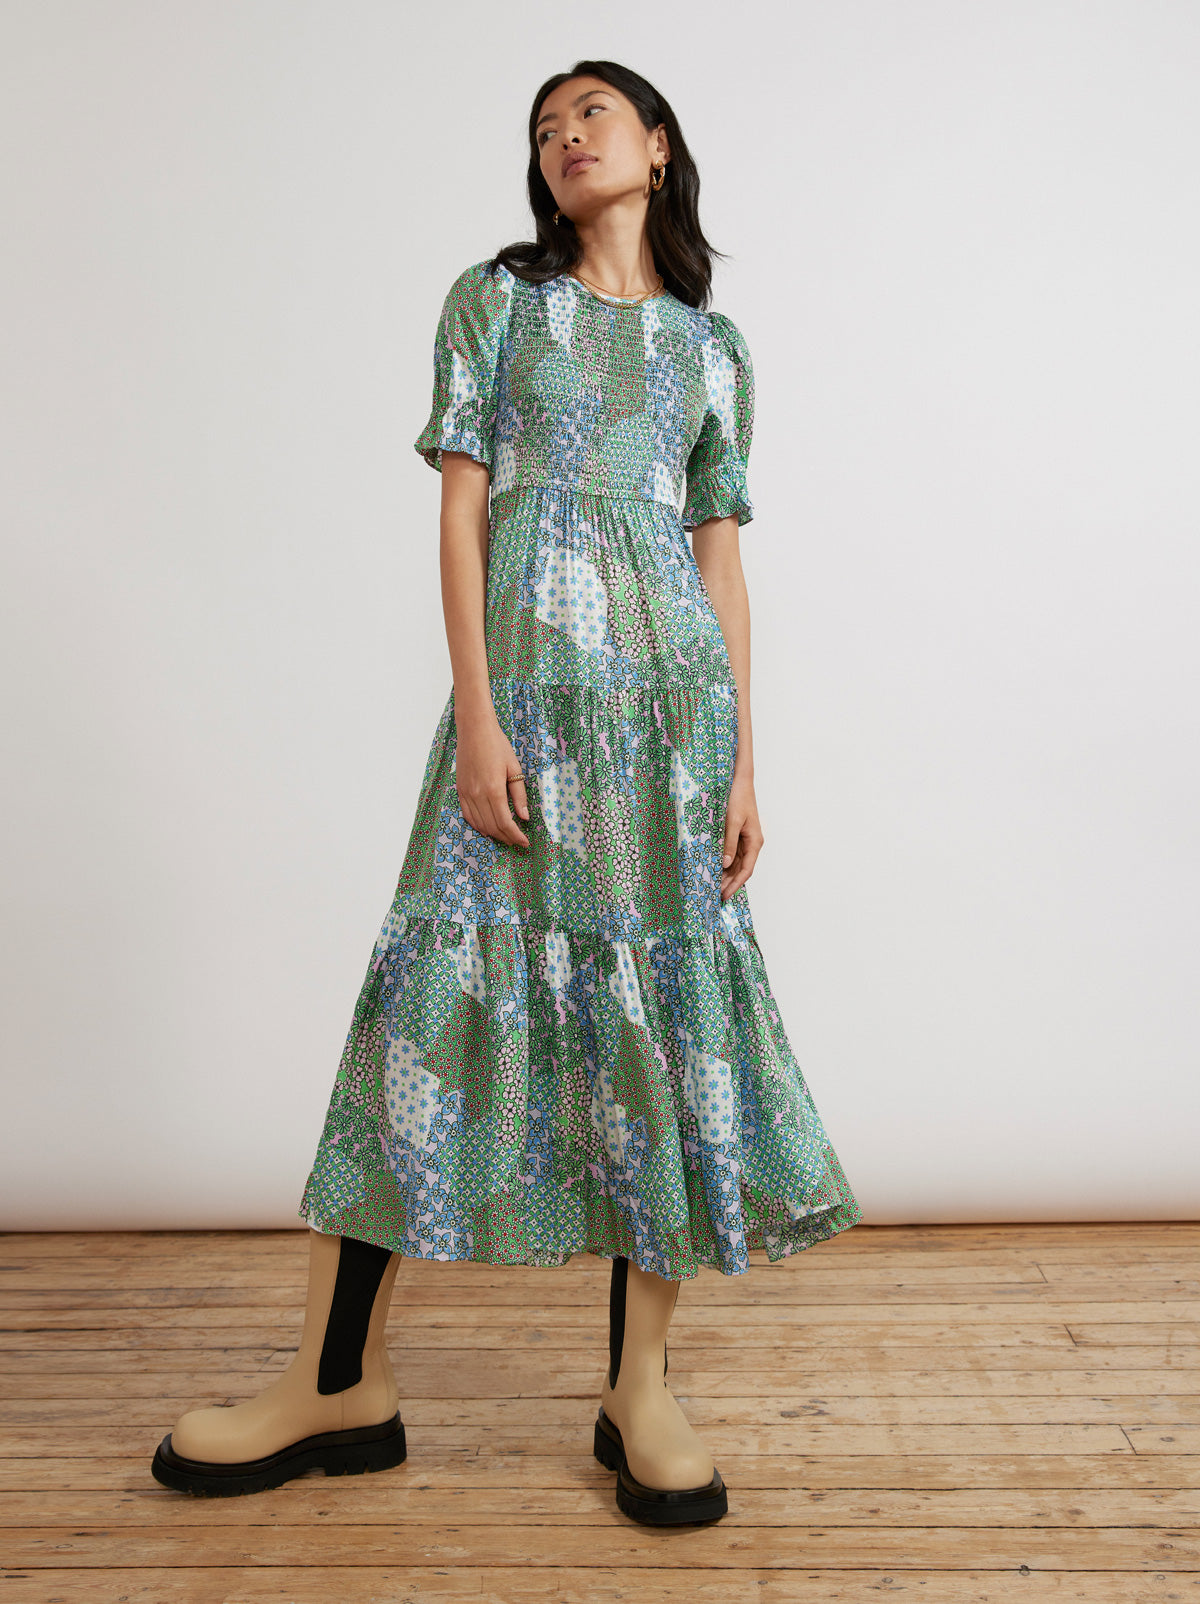 Persephone Shirred Mixed Floral Print Dress By KITRI Studio